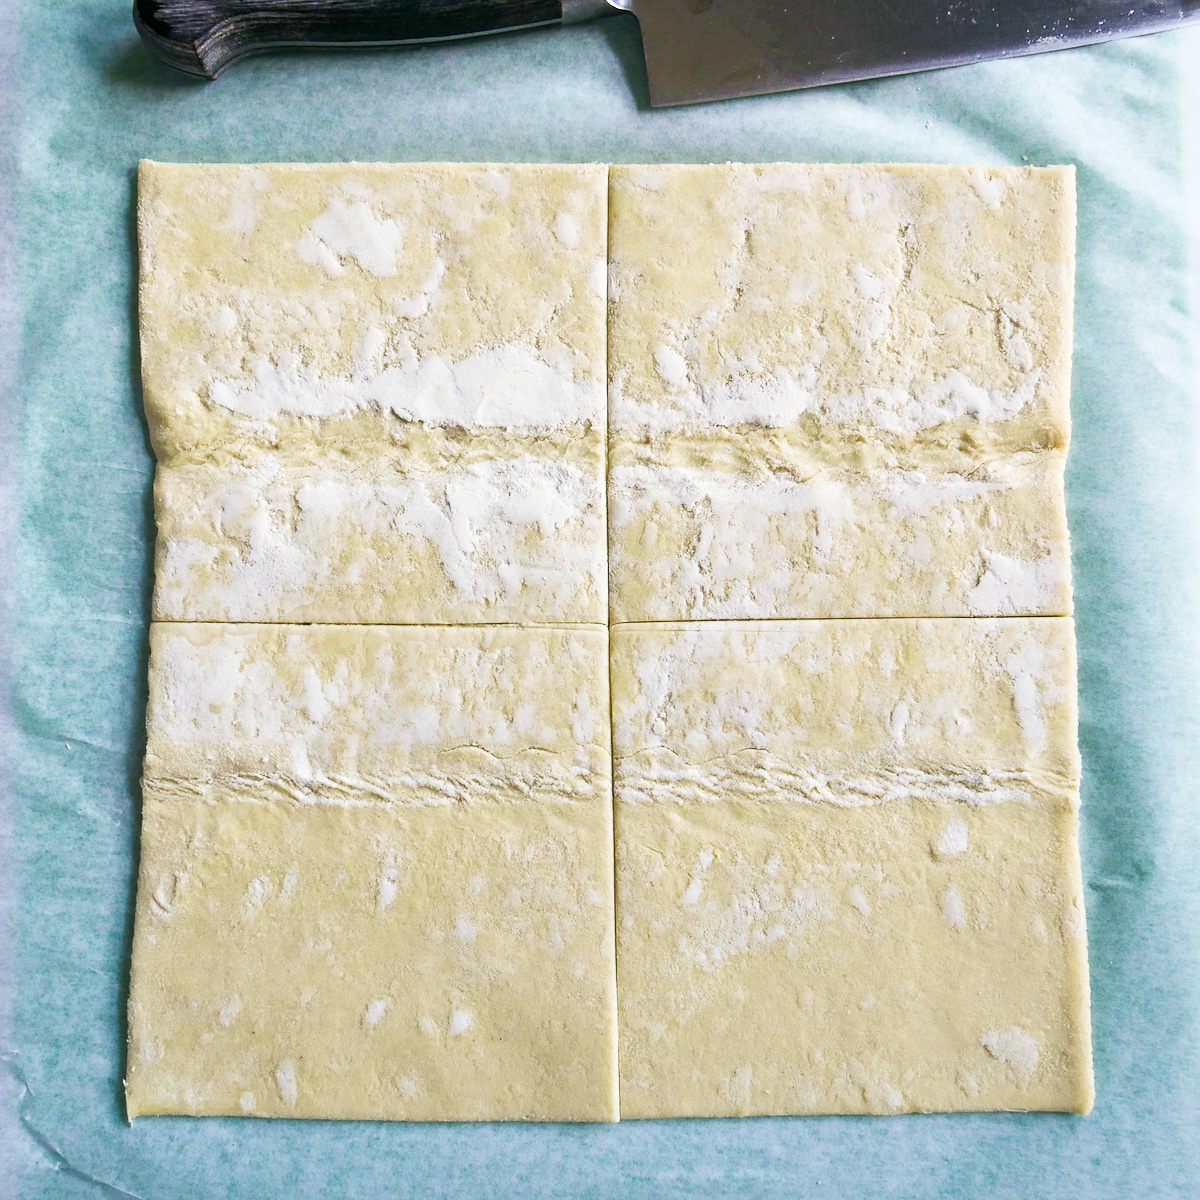 Sheet of puff pastry cut into 4 equal squares.